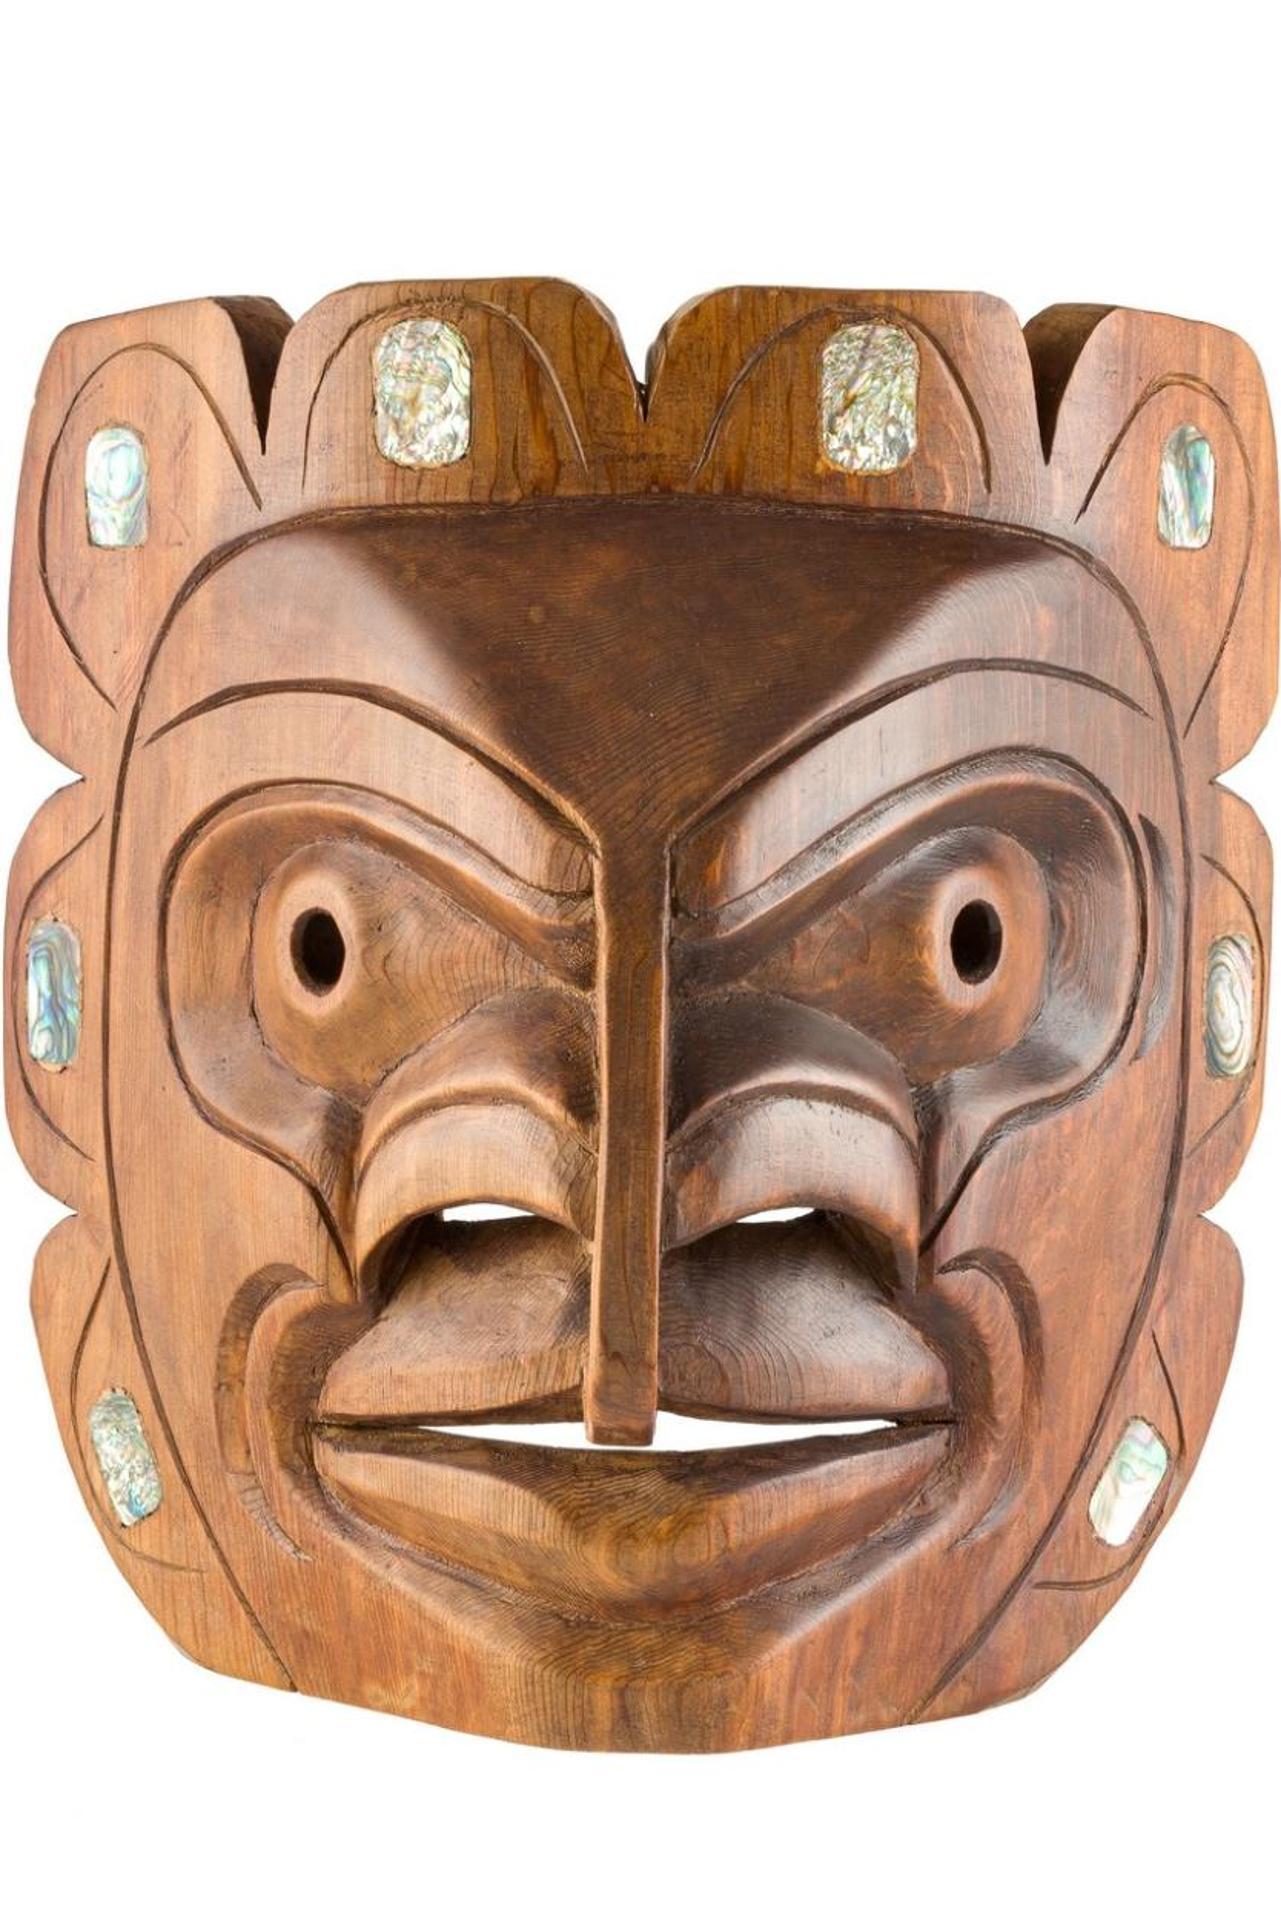 William Robertson - a carved and stained Hawk mask with inset abalone panels